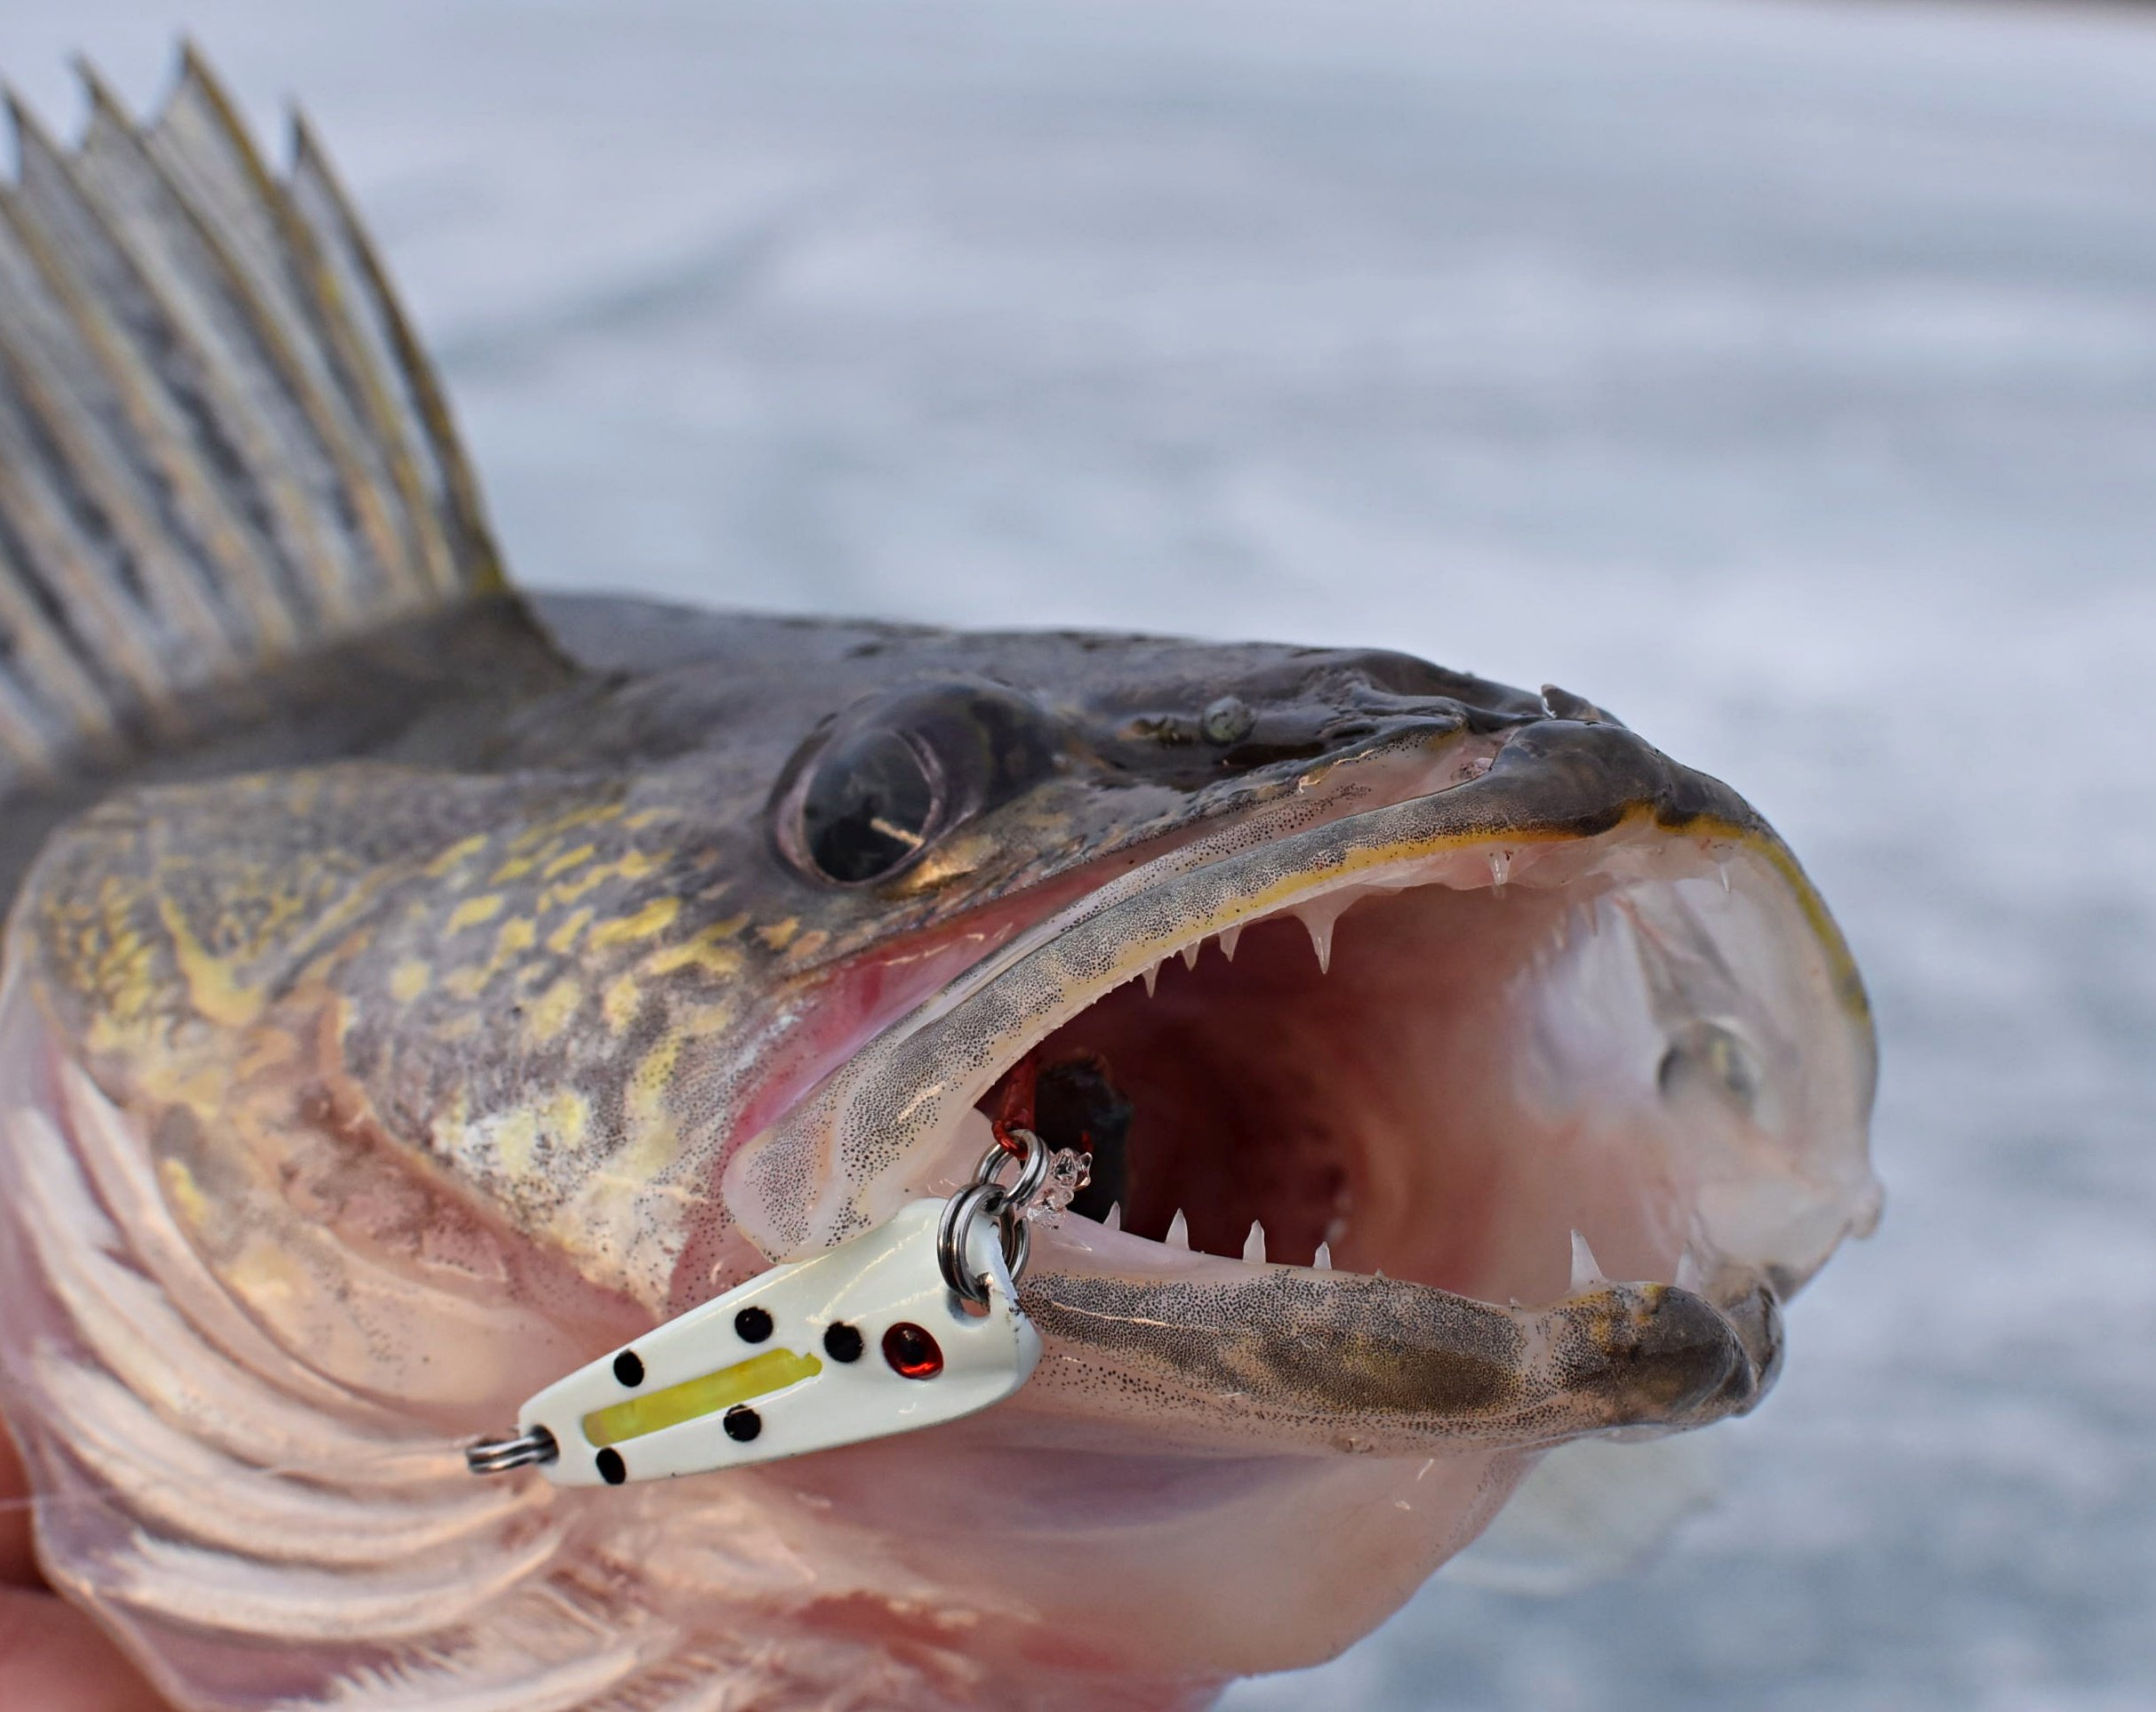 Walleye with a jigging spoon in it's mouth, caught ice fishing.